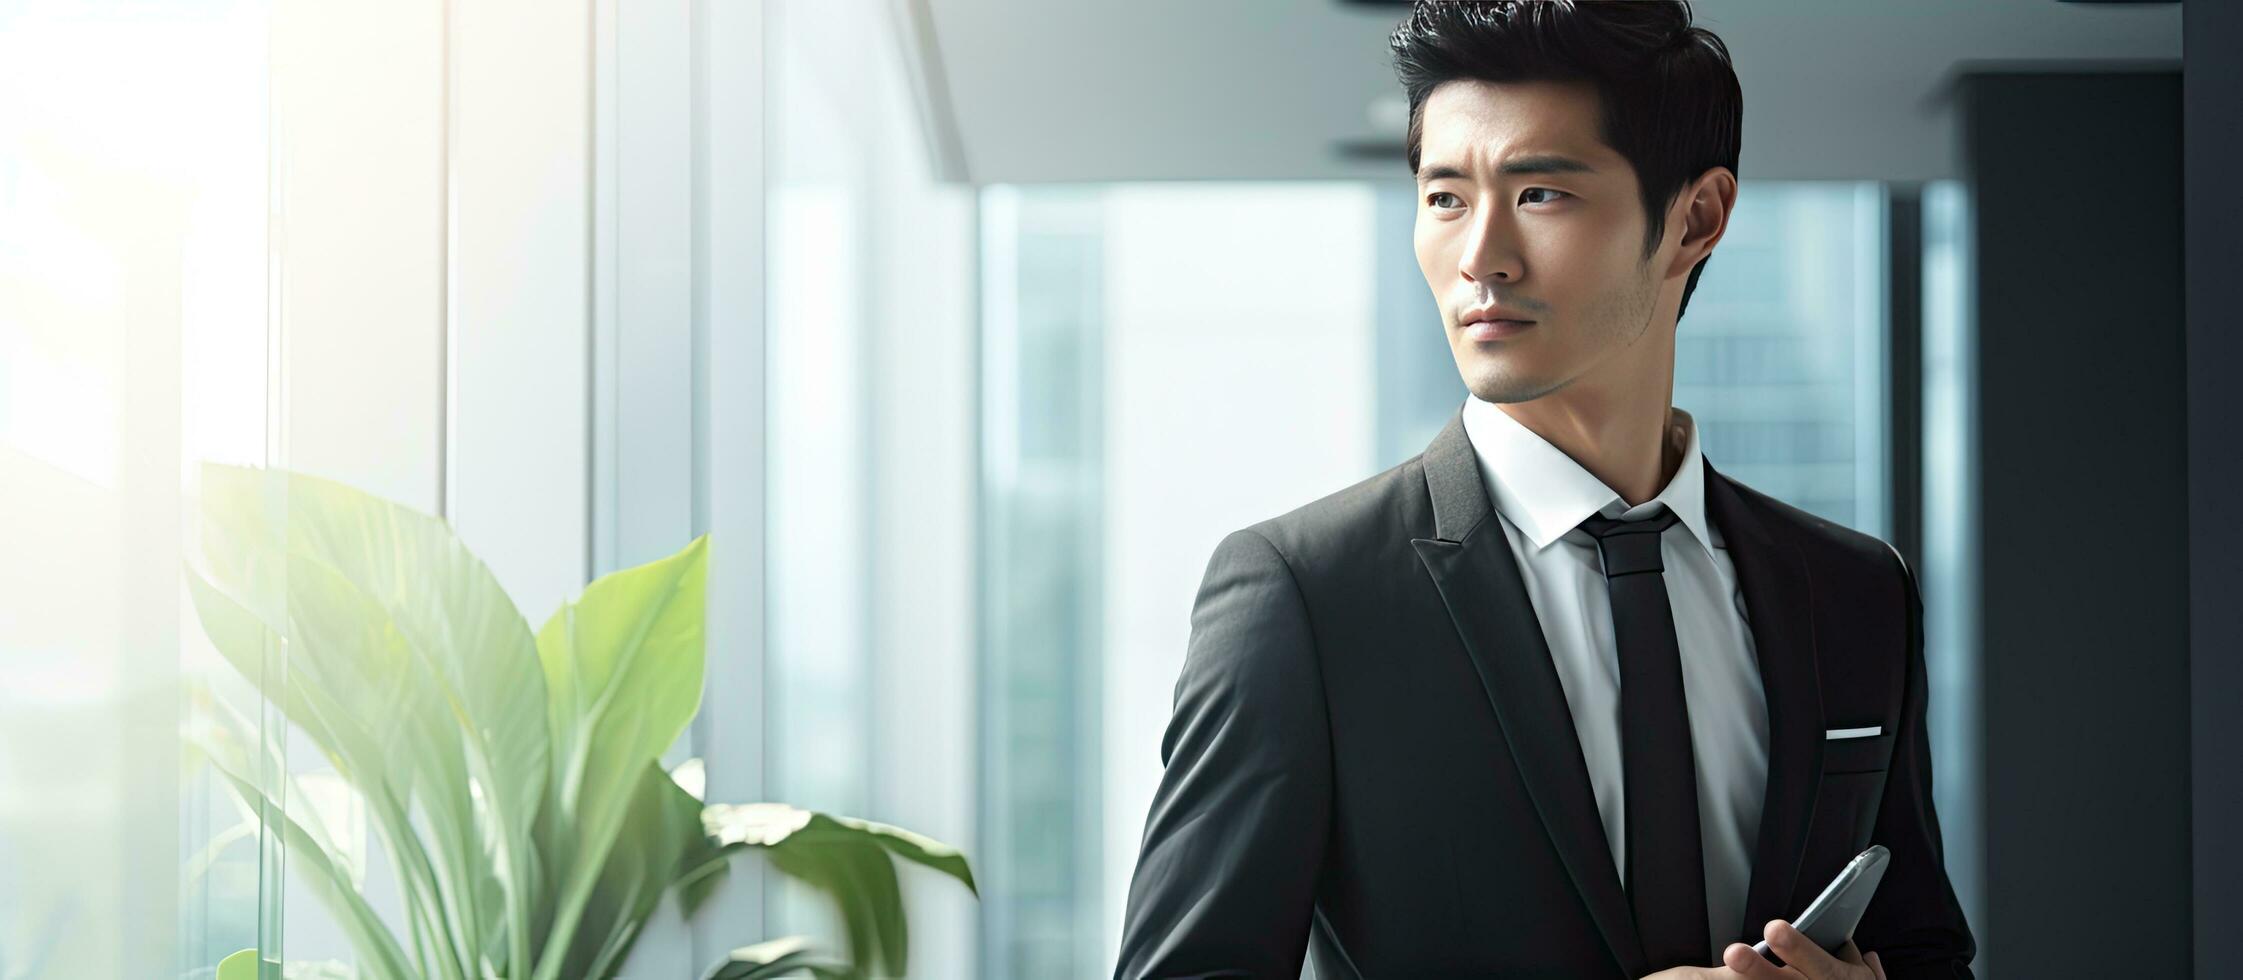 Focused Asian businessman using a tablet working in a modern office setting Handsome Japanese man in a black suit working remotely Technology and work con photo